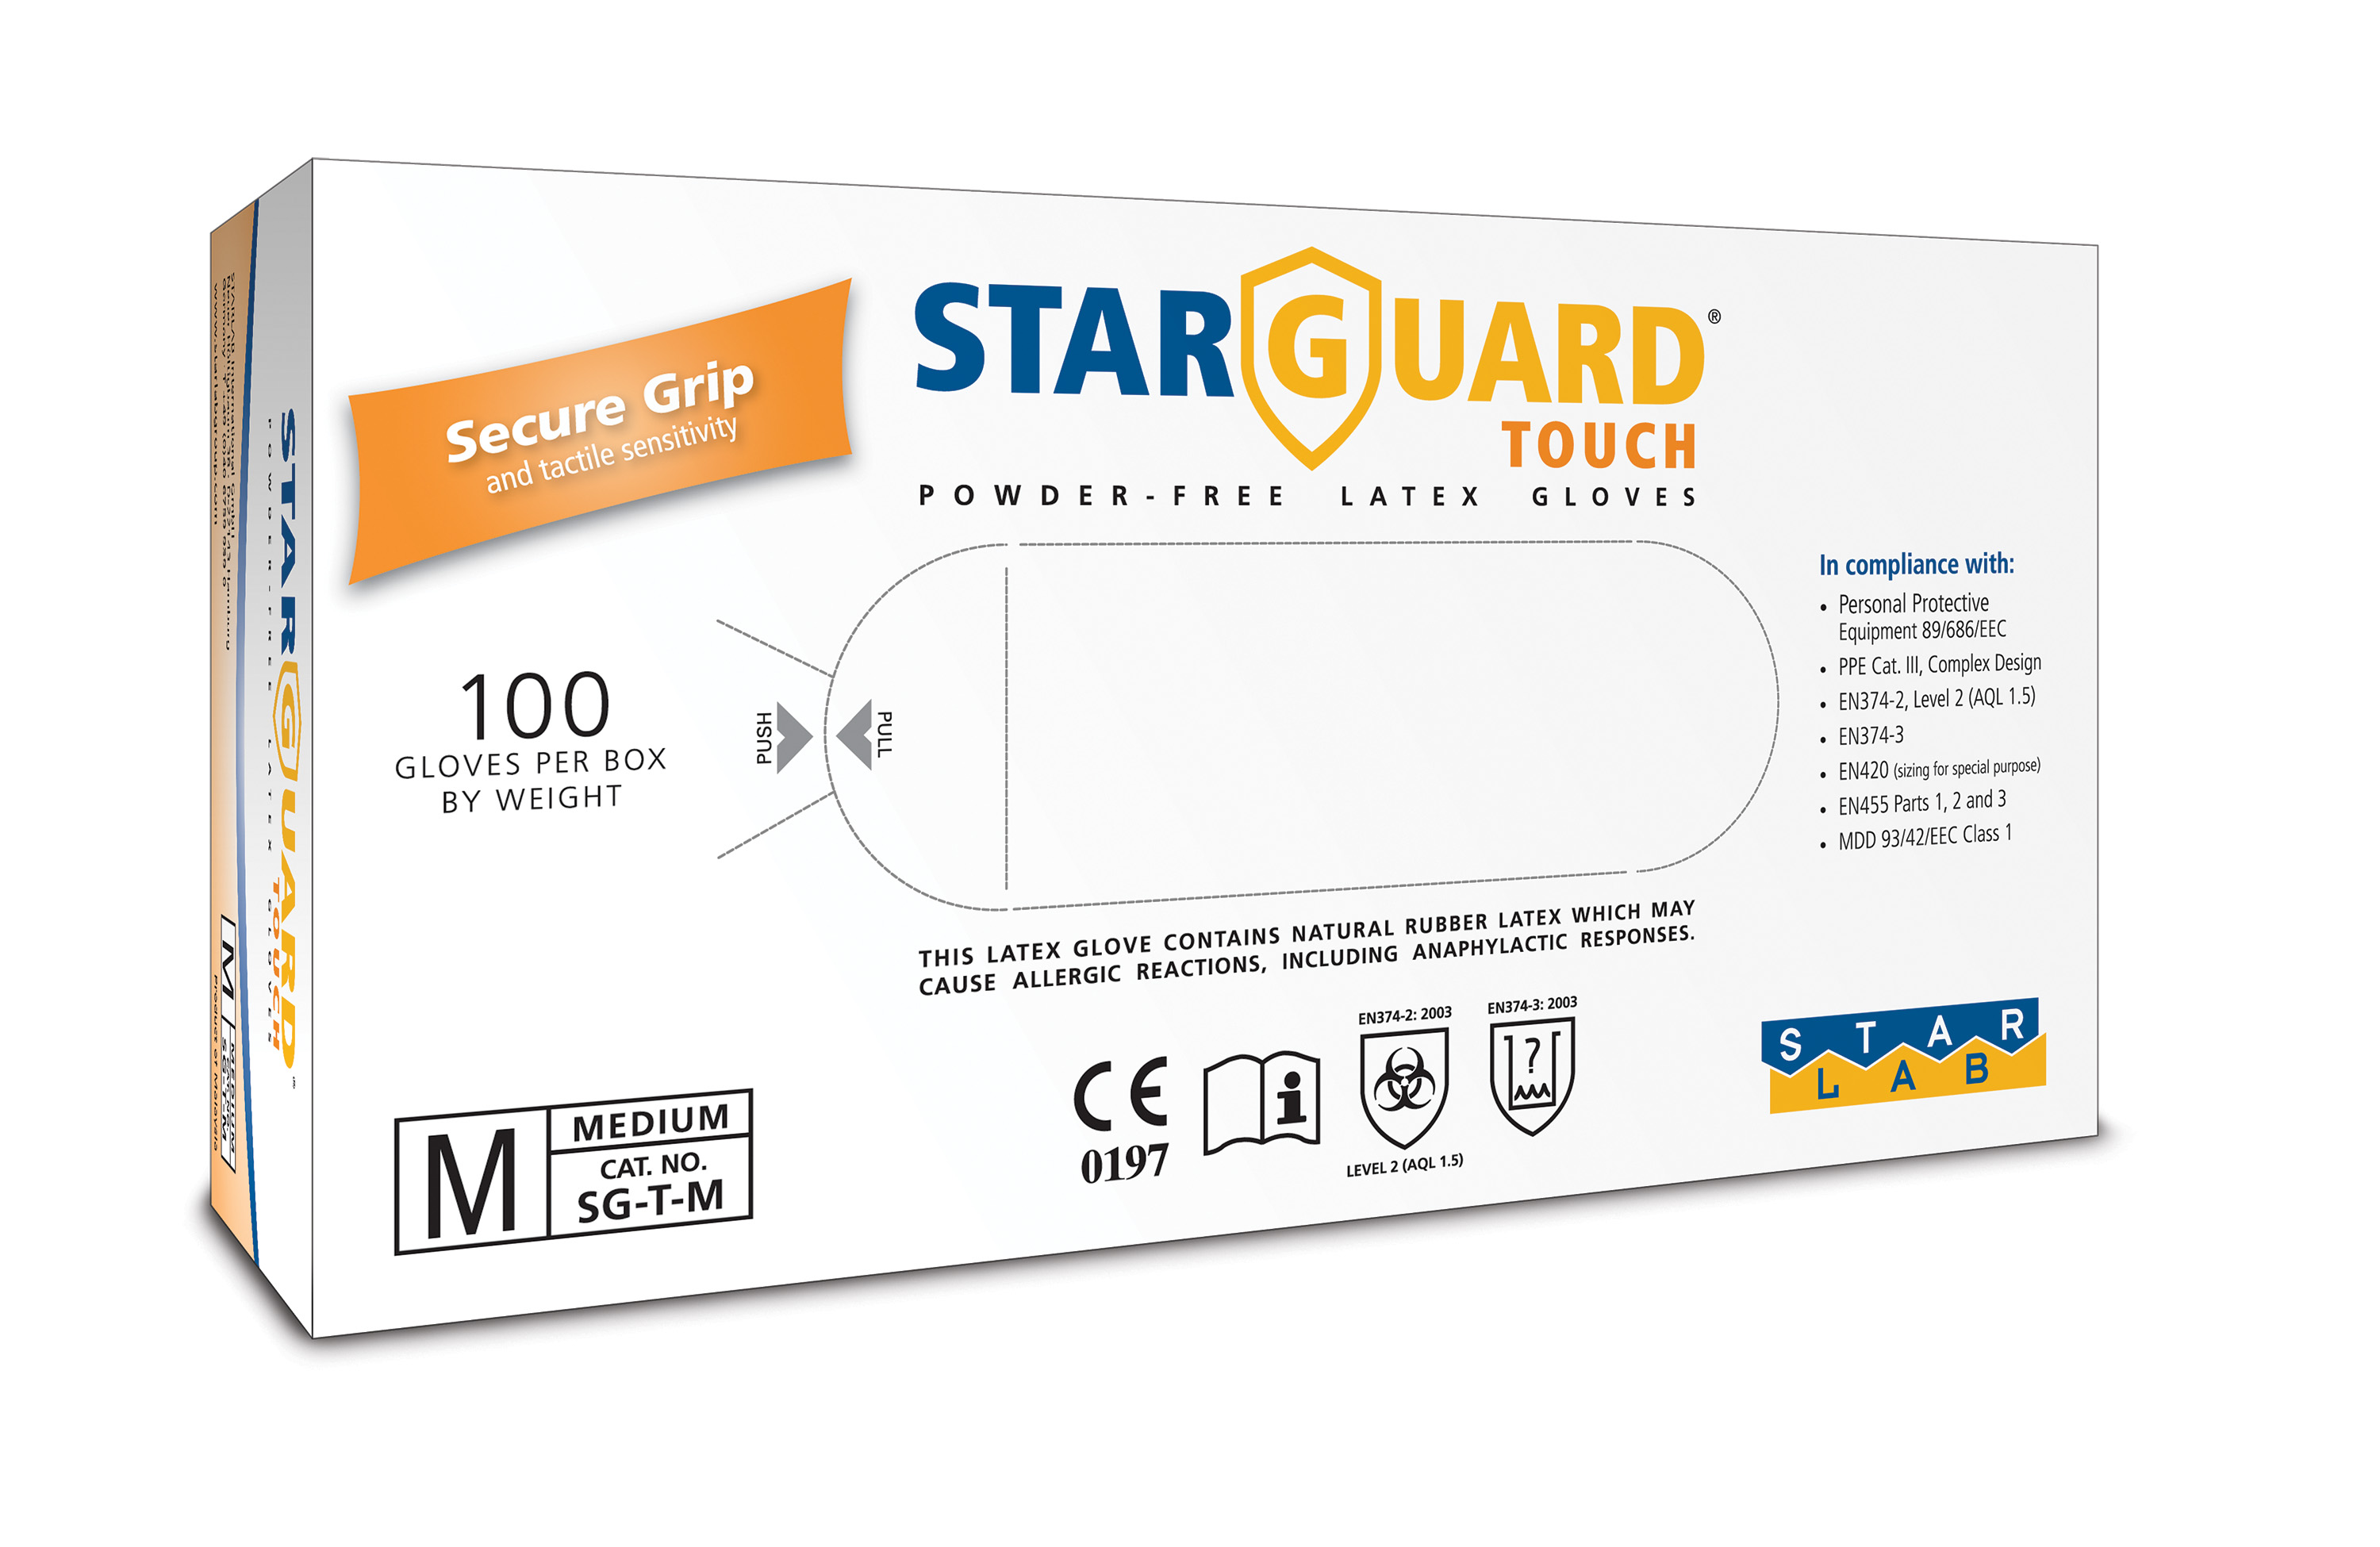 StarGuard TOUCH Latex Gloves, Powder Free, Natural, Size L, Pk/ 10 x 100 gloves.